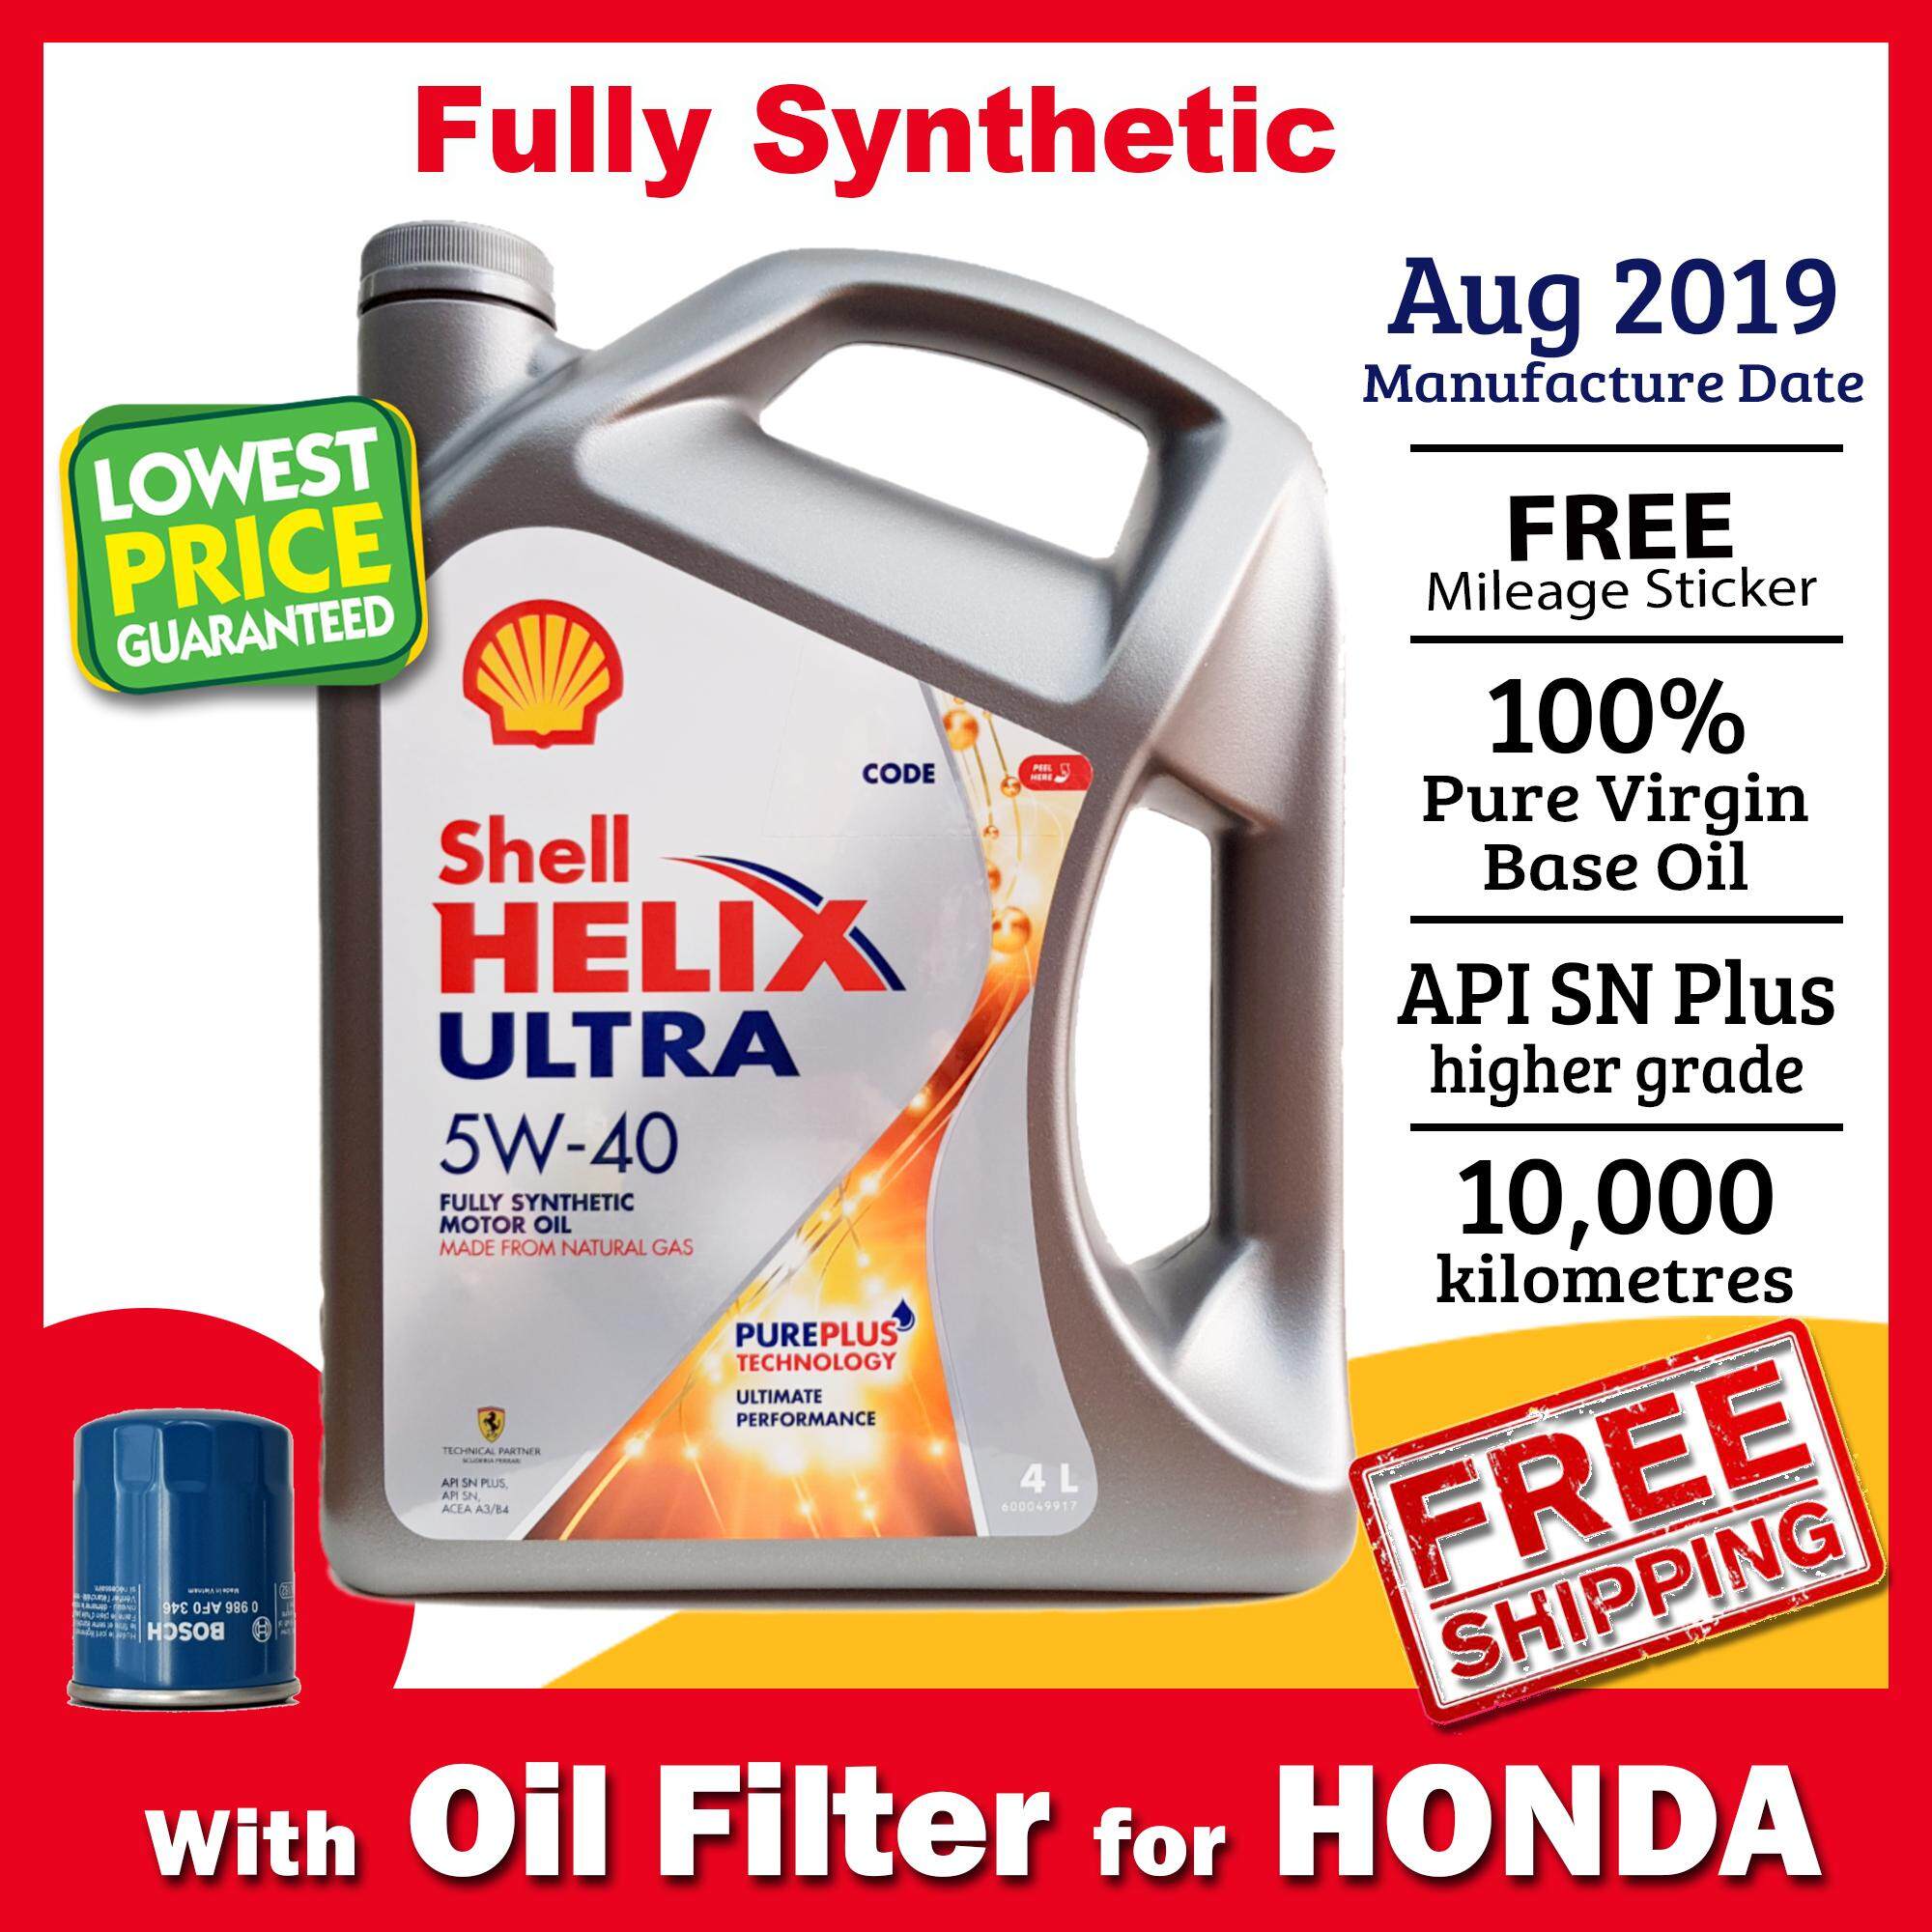 Shell Helix Ultra 5W-40 4L Fully Synthetic Engine Oil 5W40 with Oil Filter for Honda